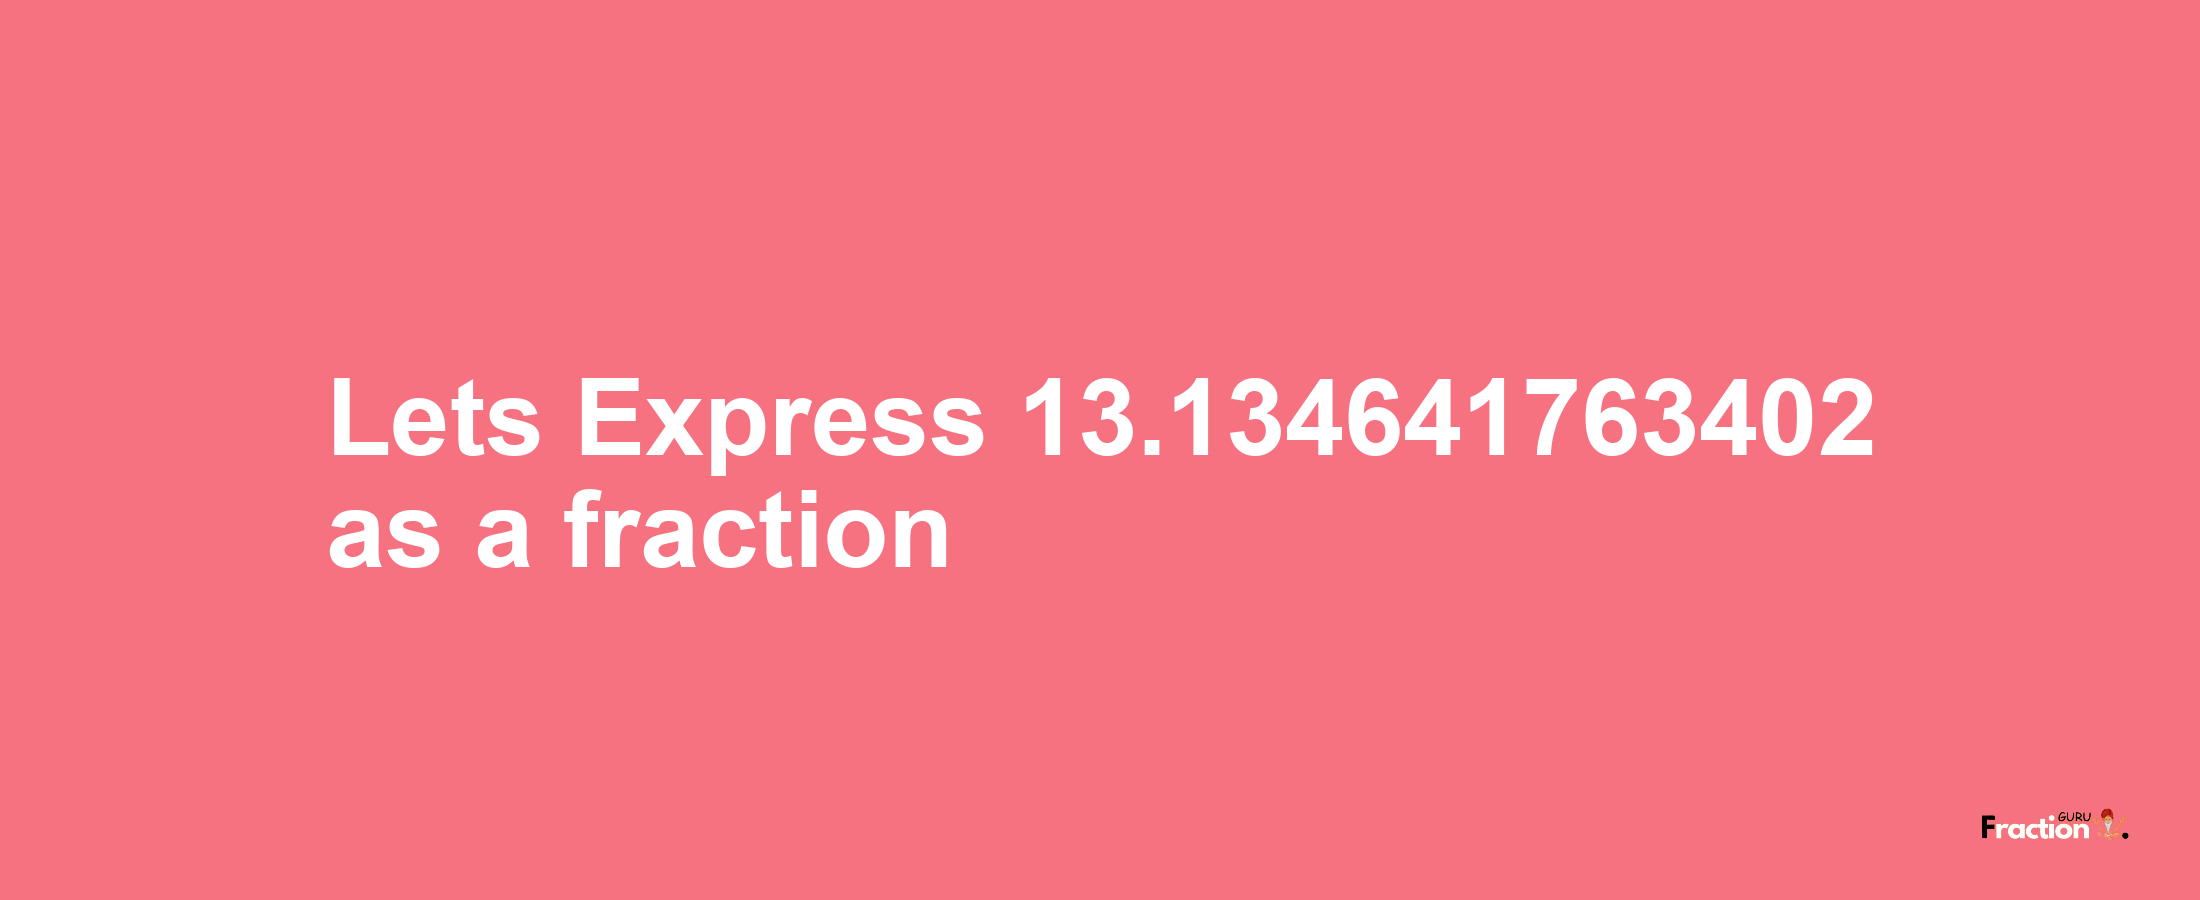 Lets Express 13.134641763402 as afraction